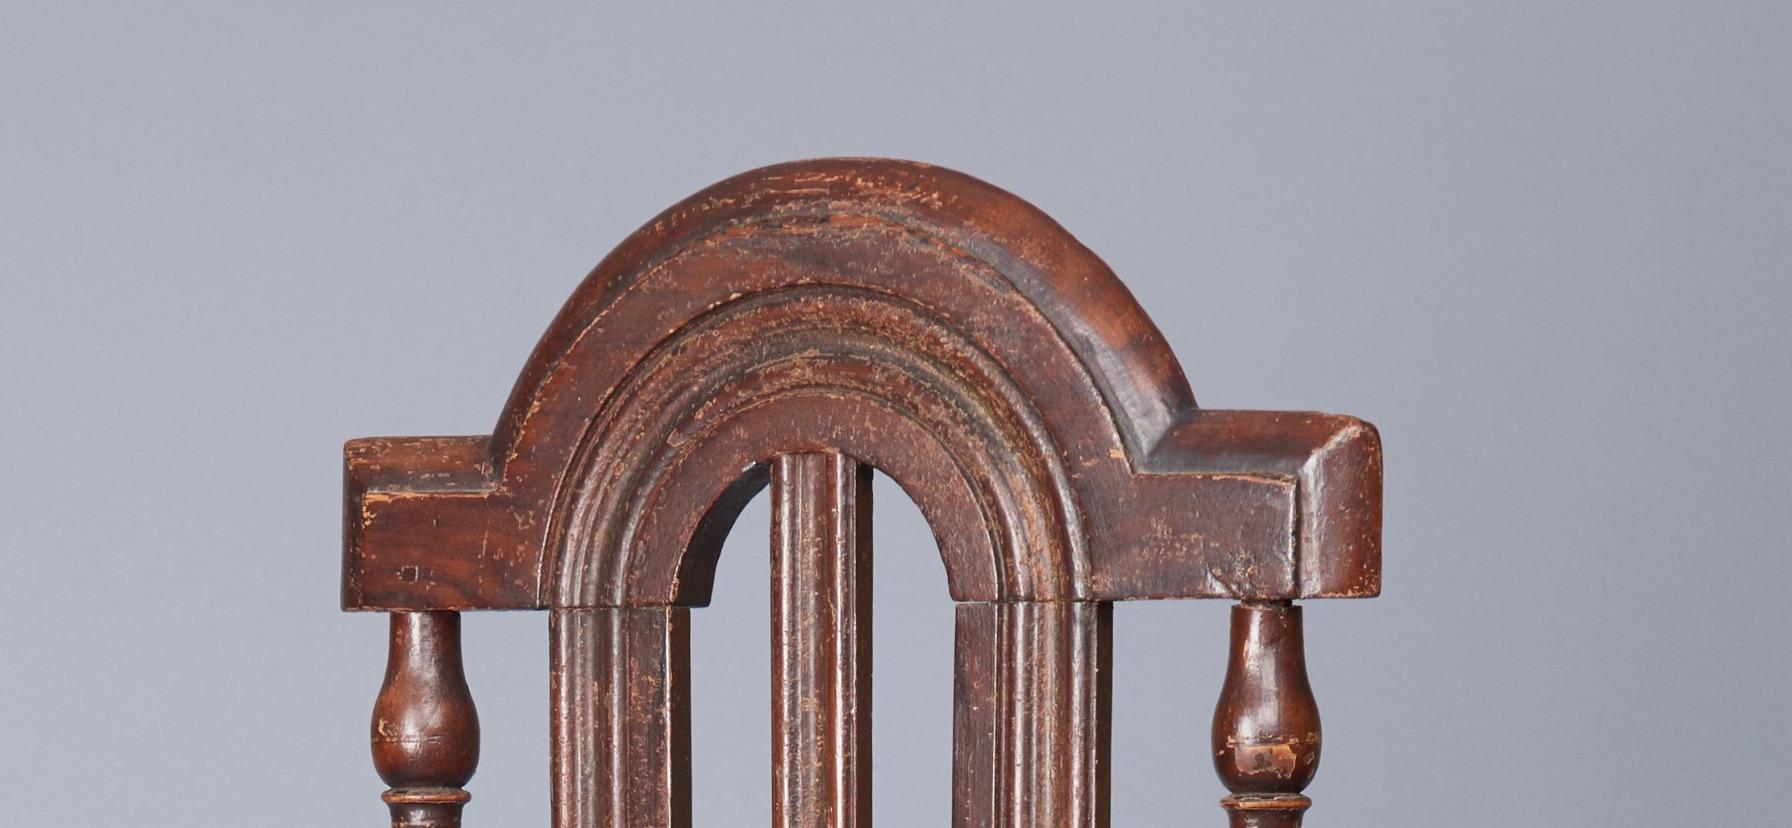 Arched crest, good turnings, molded splats, rush seat. Turned legs terminating in ball feet. Wonderful old grained paint and patina. Pennsylvania, circa 1730-1740.